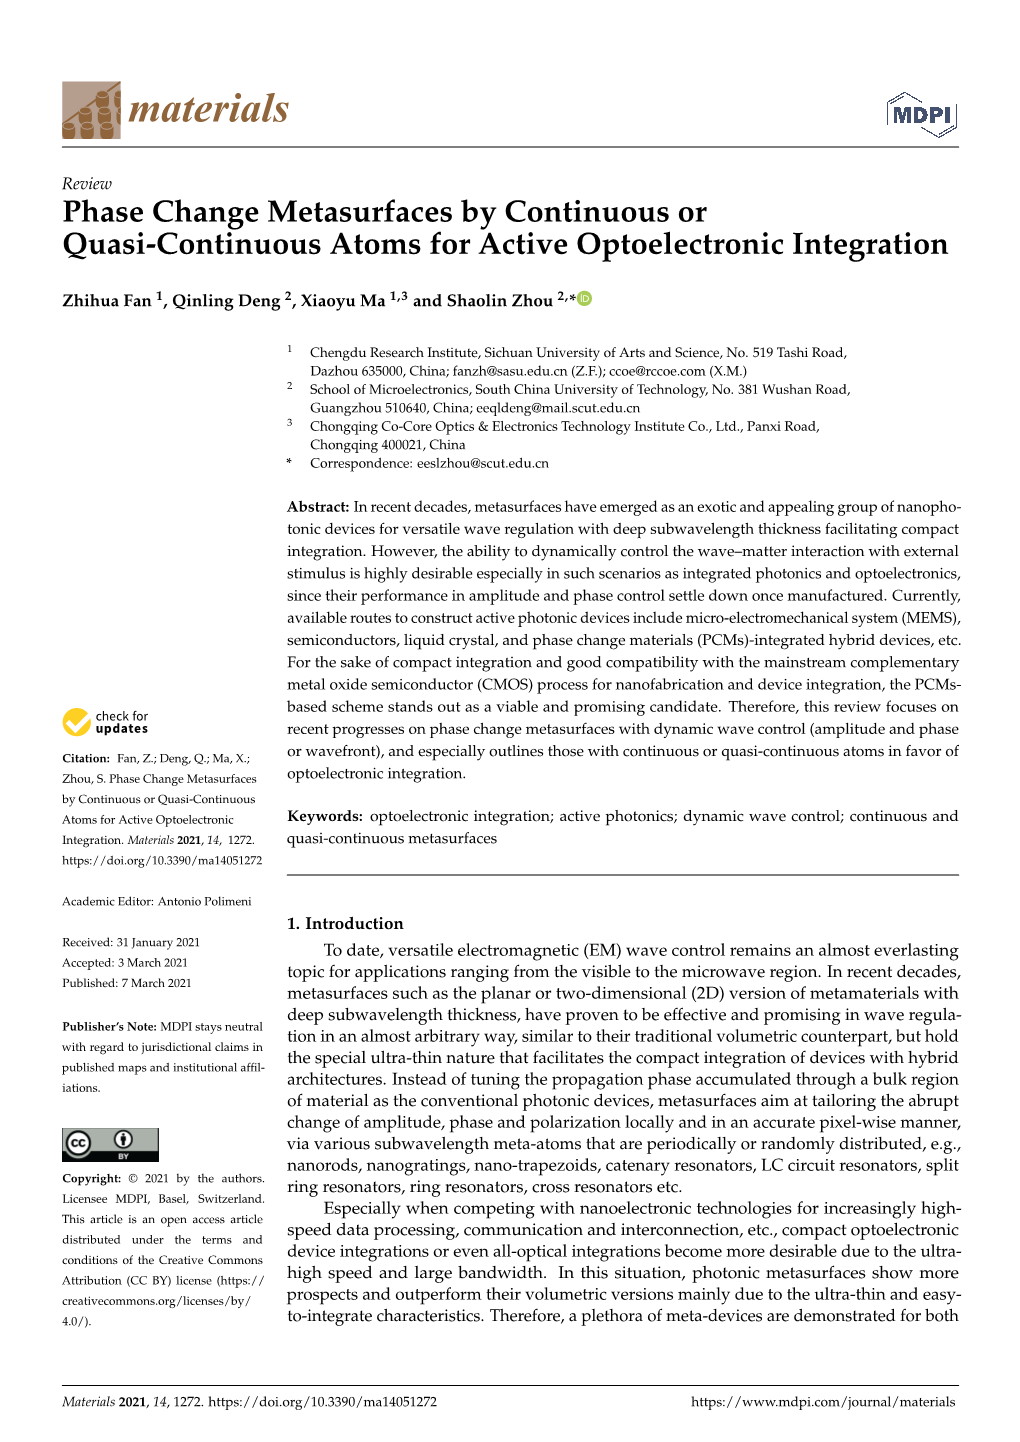 Phase Change Metasurfaces by Continuous Or Quasi-Continuous Atoms for Active Optoelectronic Integration